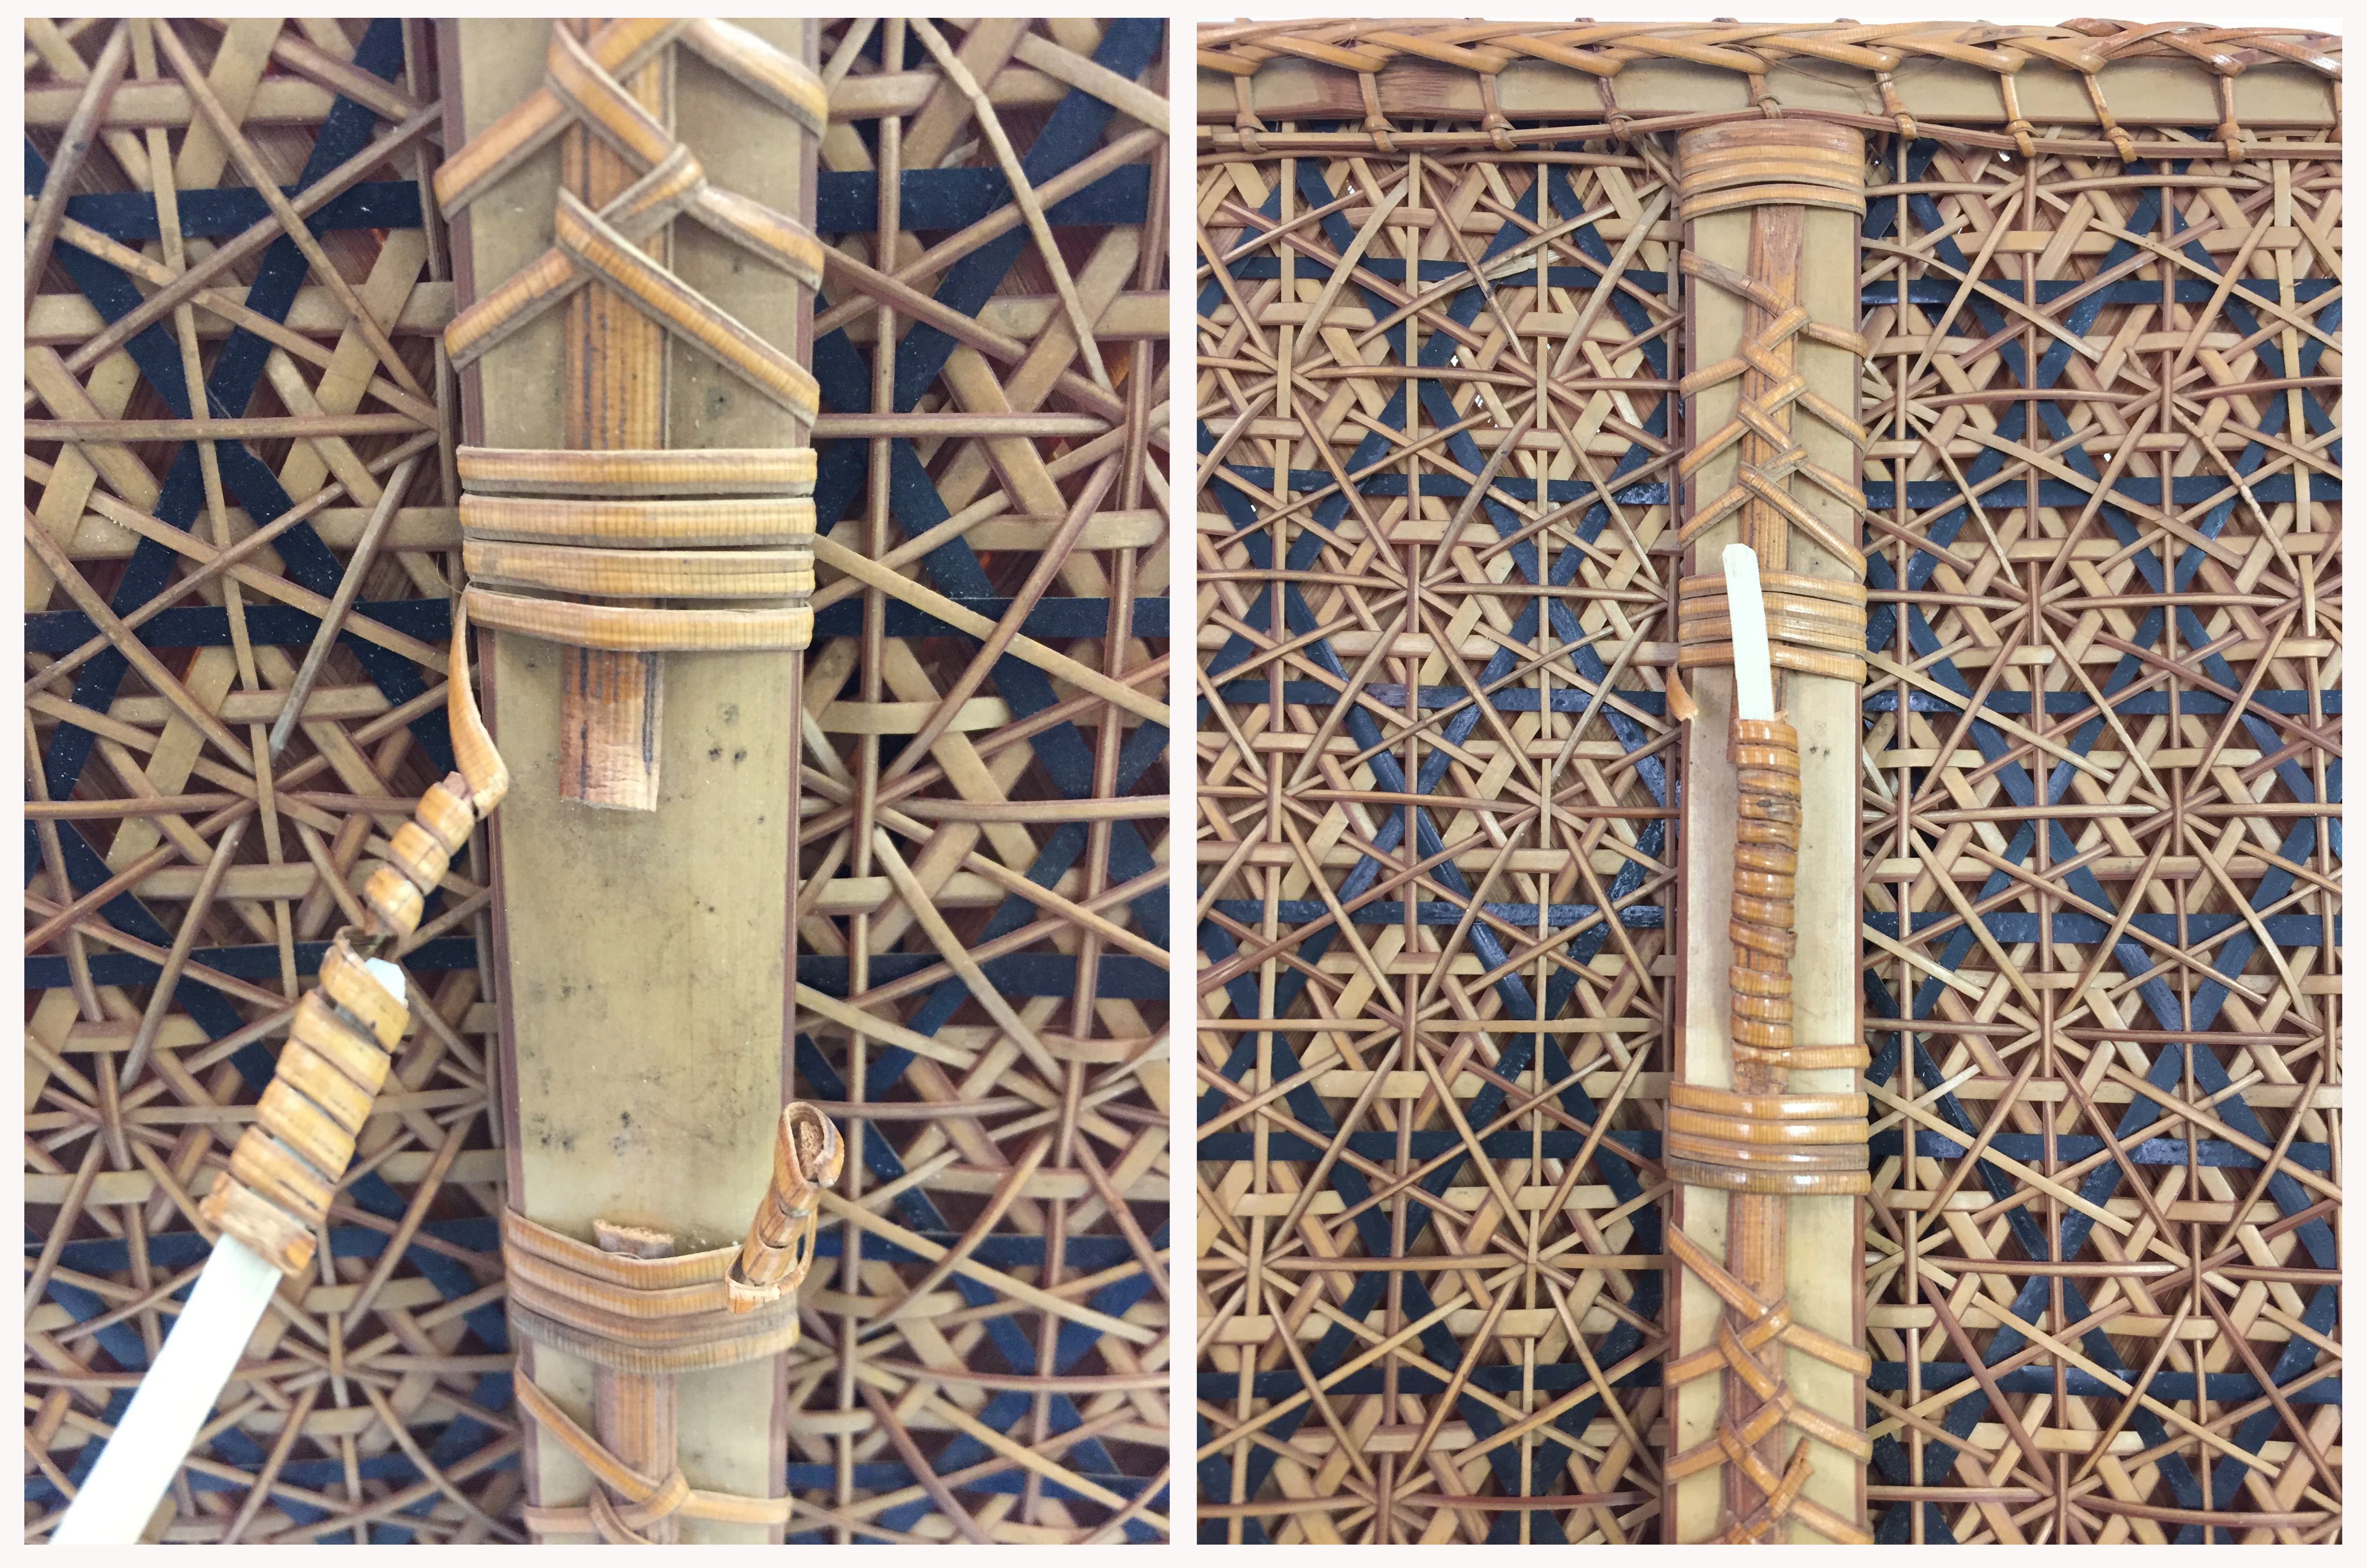 Left: Close-up, broken coil of bamboo on woven hexagonal pattern. Right: repaired and splinted coil of bamboo on woven hexagonal pattern.